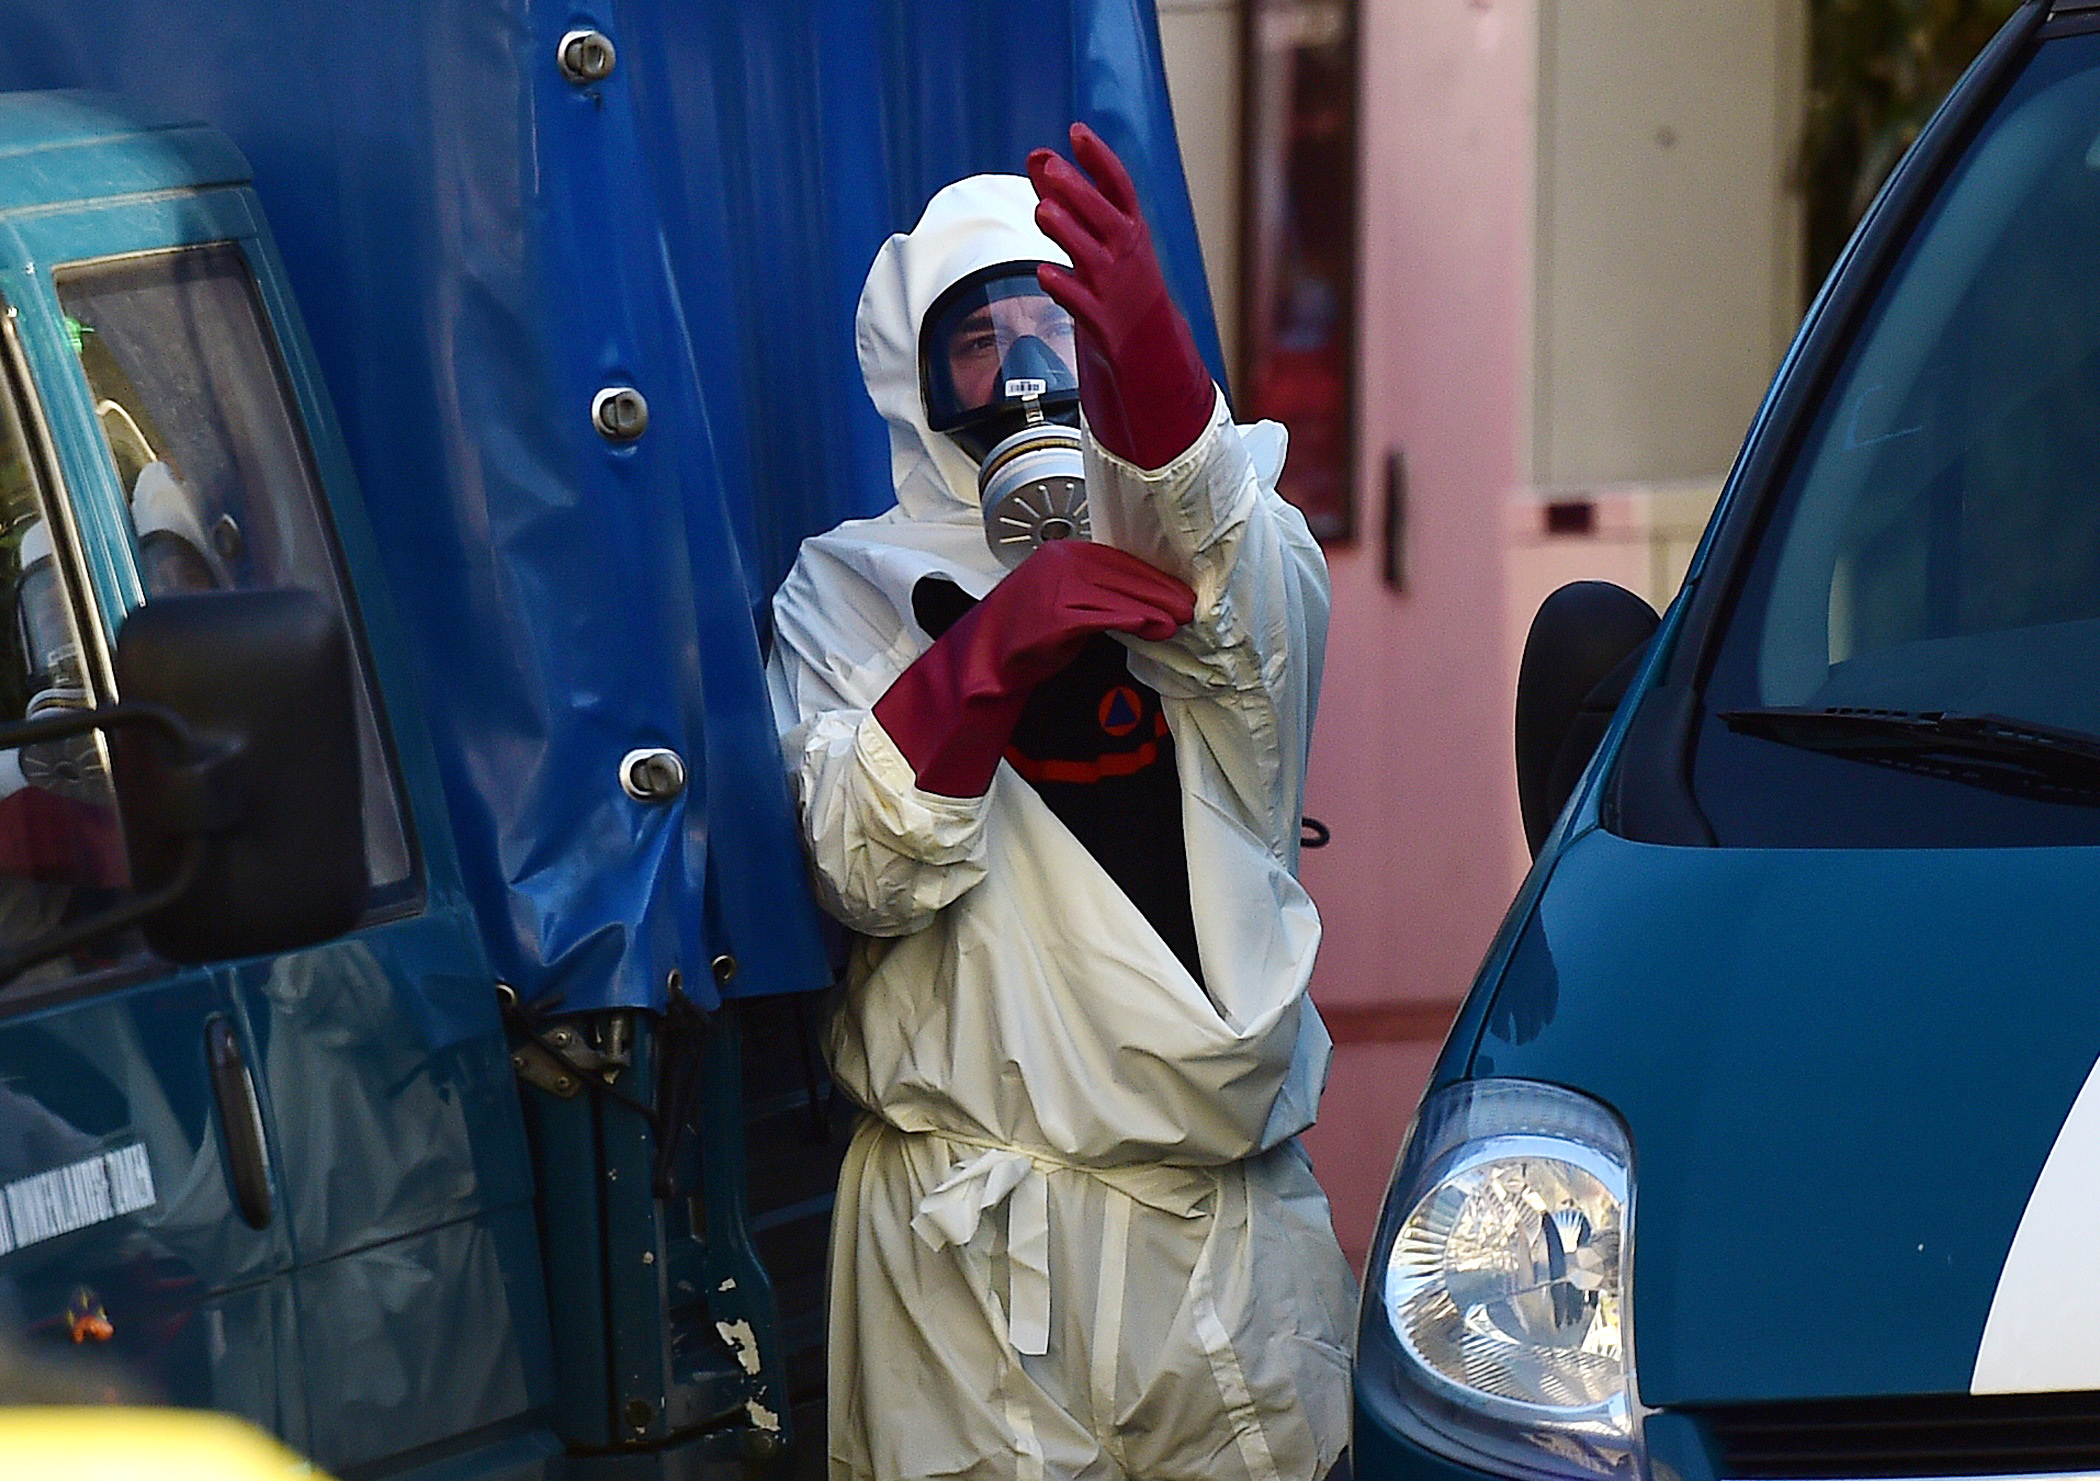 PHOTO: A decontamination unit worker suits up in front of Brussels' Great Mosque in Brussels on Nov. 26, 2015.